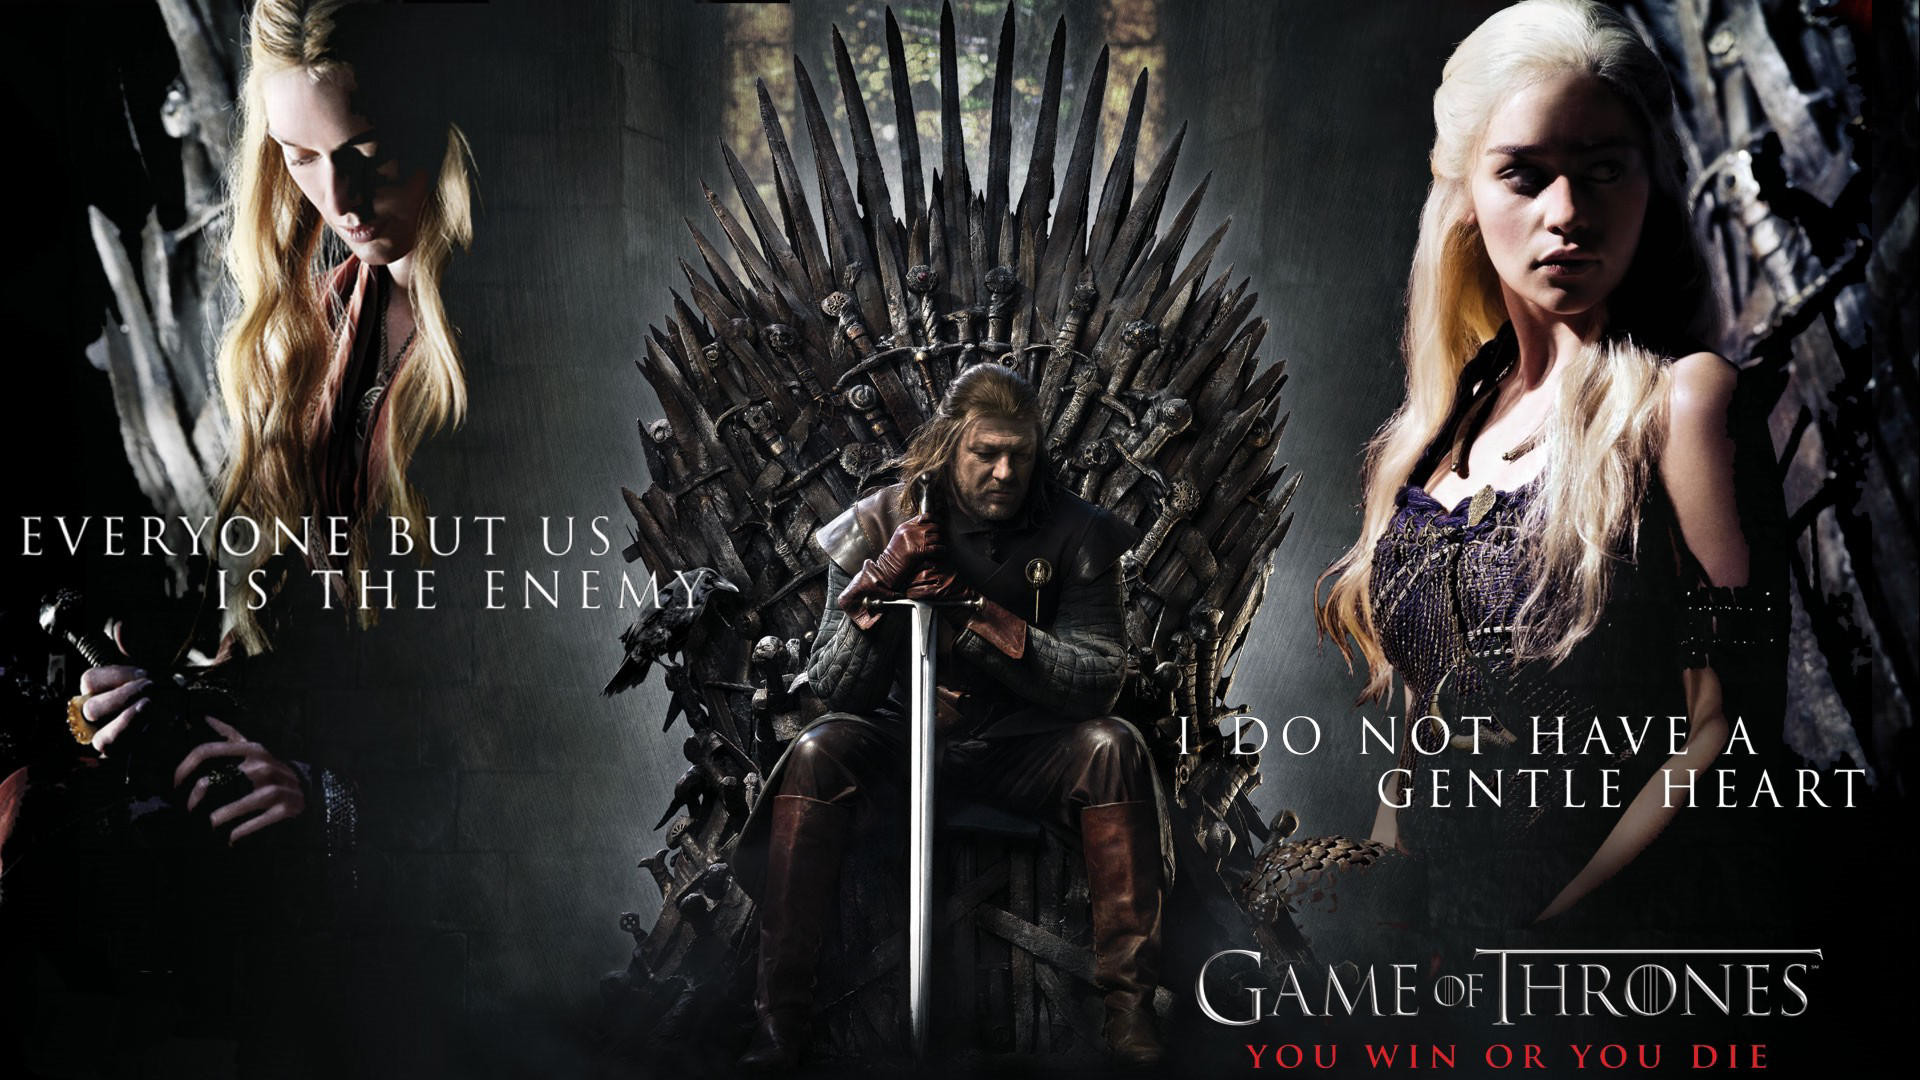 1920x1080 Game of Thrones Quotes - http://wallsfield.com/game-thrones-3-hd-wallpapers/  | TV Series Wallpapers | Pinterest | Game thrones, Hd wallpaper and Free hd  ...